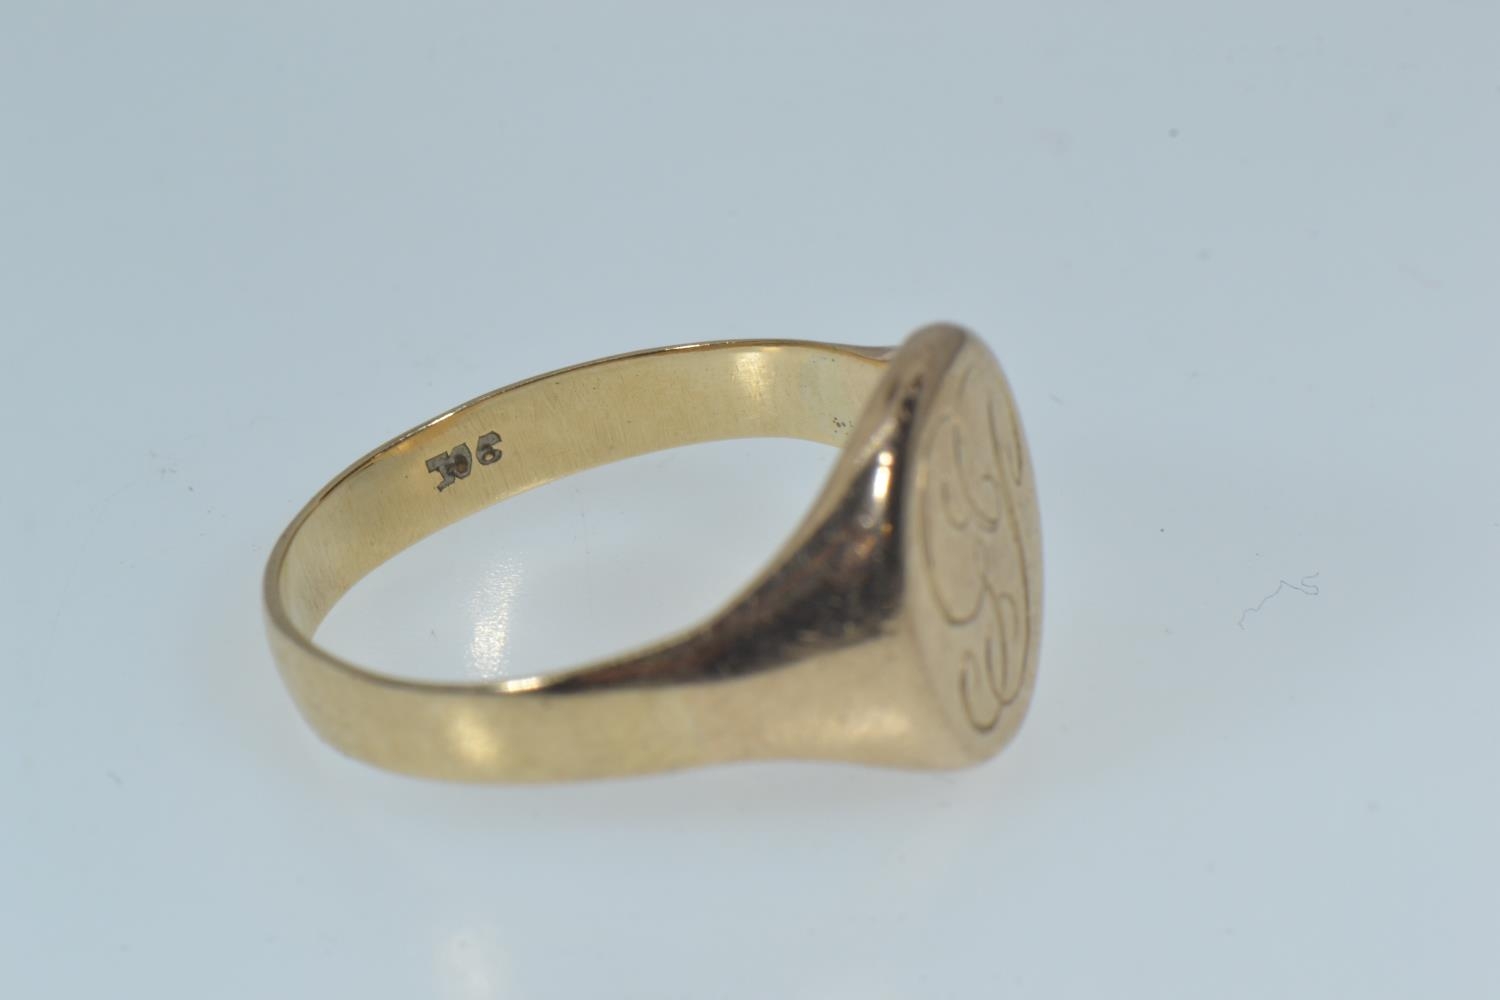 9ct gold signet ring, engraved with initials 'GP', size W1/2, 5.87 grams  - Image 4 of 4